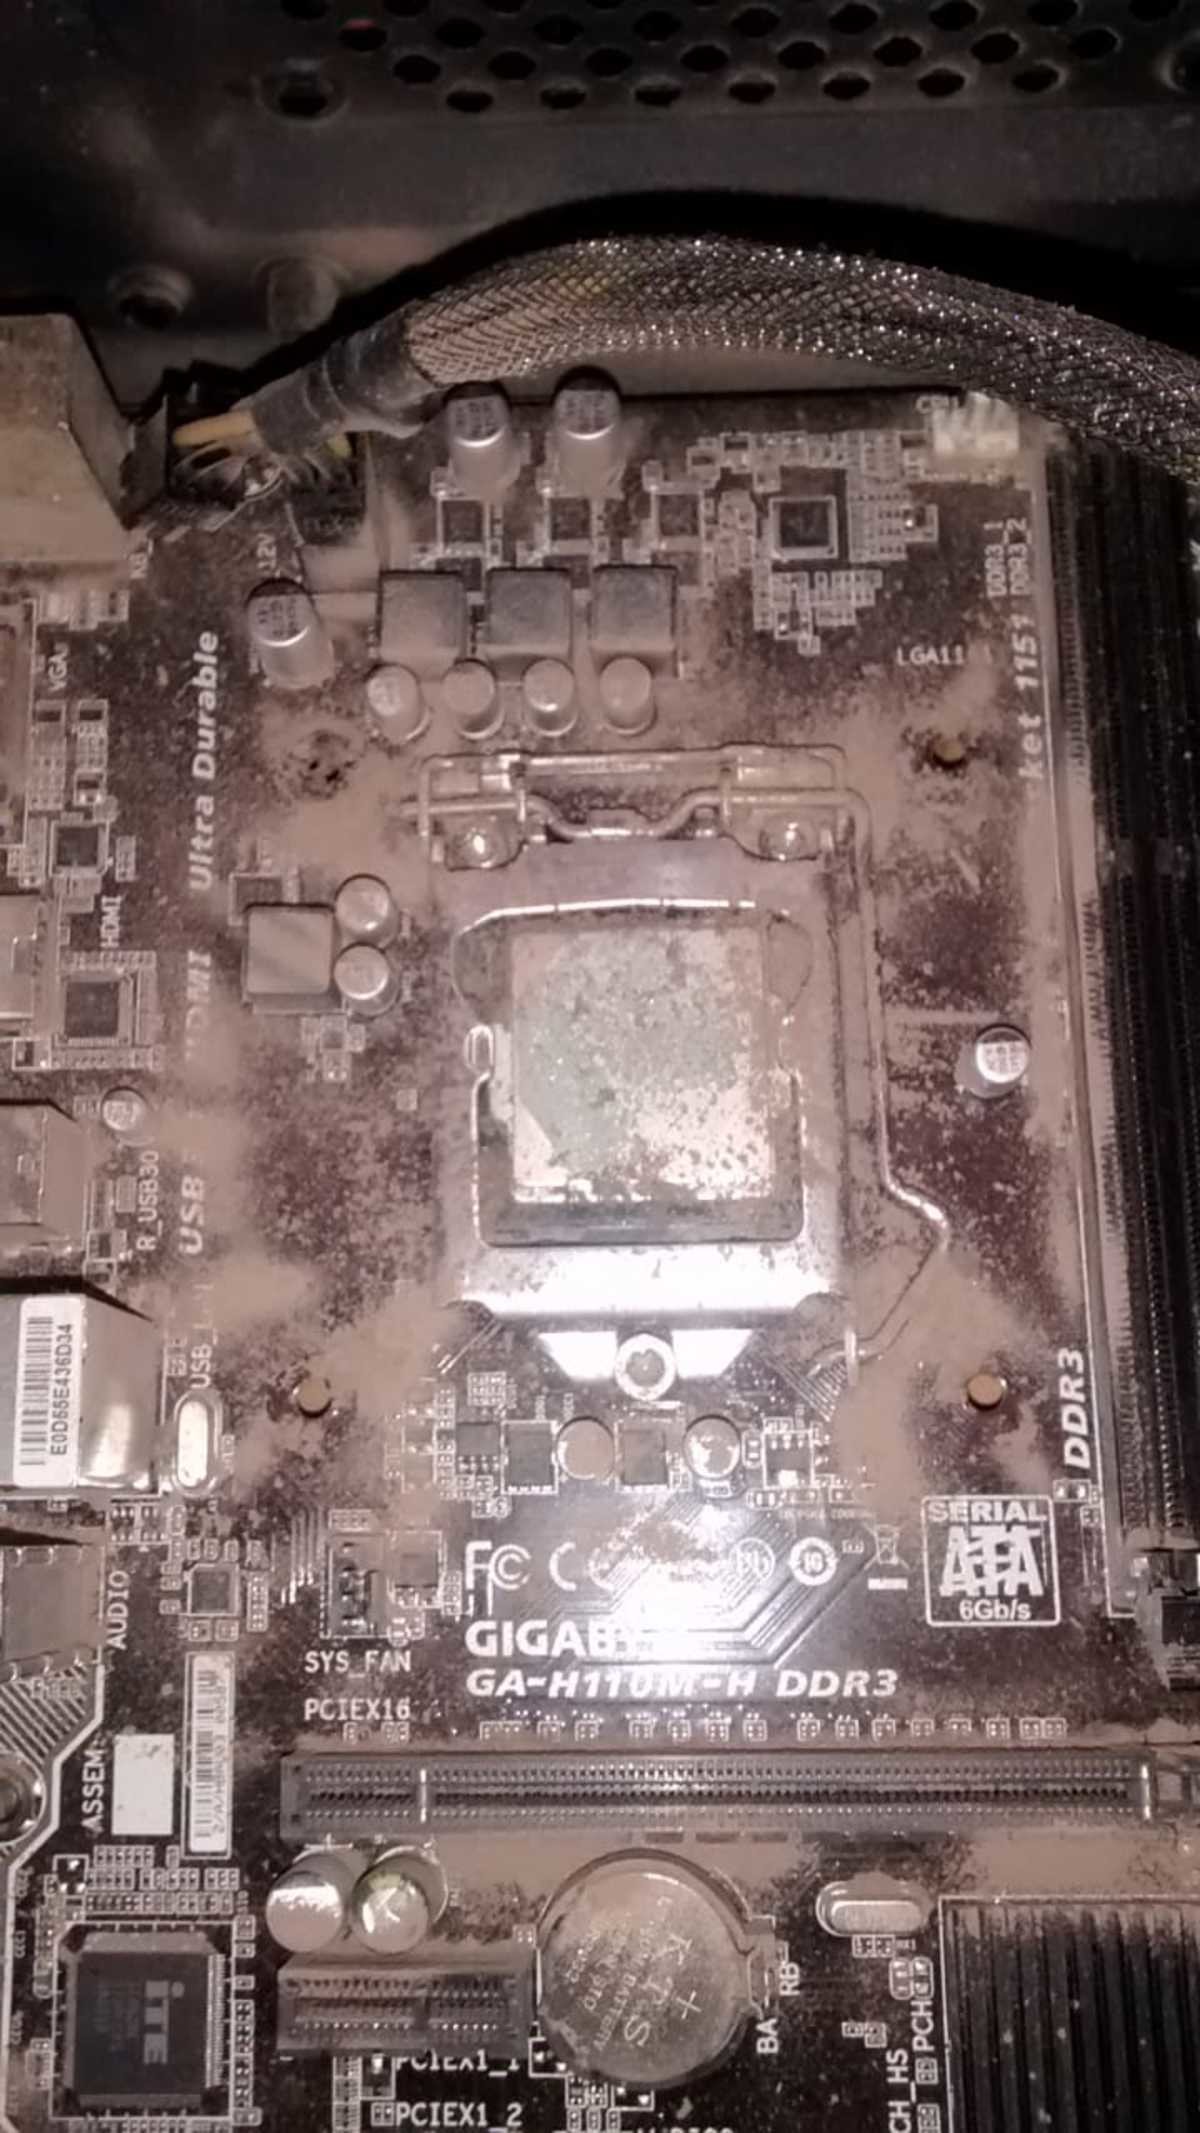 Today at work: Its been 5 months how did it get this dirty again. I cleaned this PC and left it shiny clean back in january (posted it at: the white GPU and int